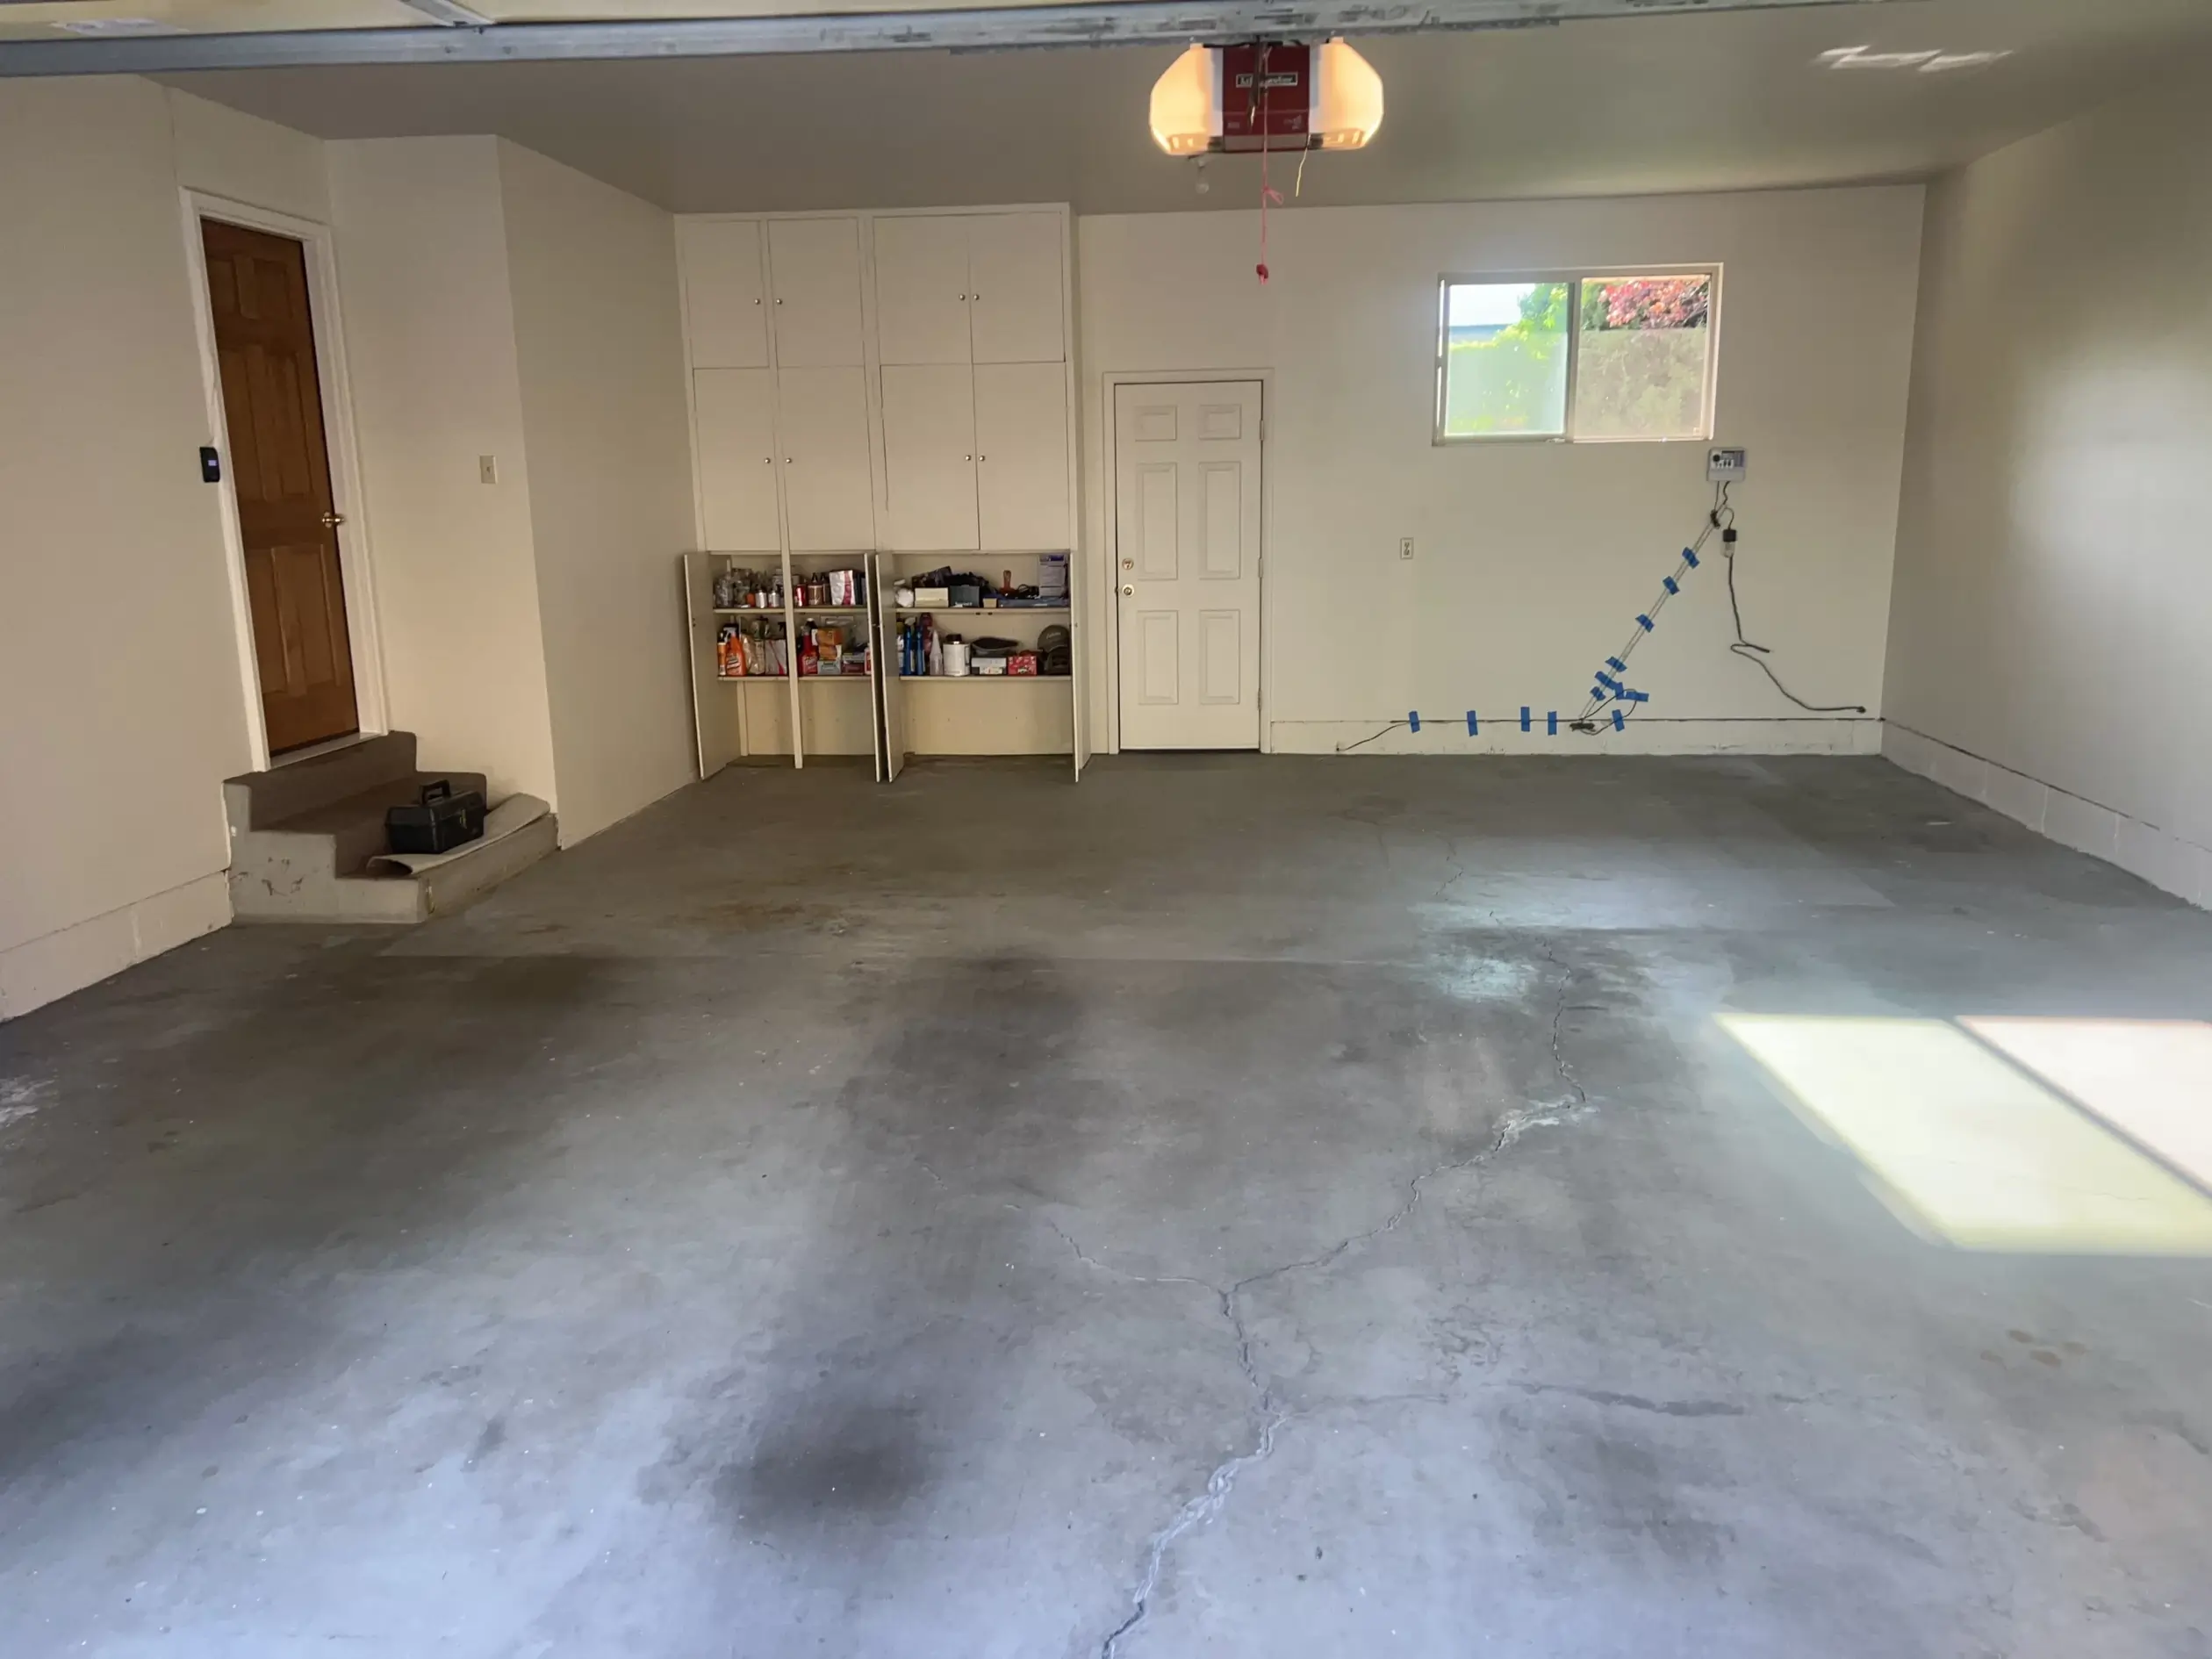 A before photo of an empty garage with an unpolished floor, white shelves, and brown door.